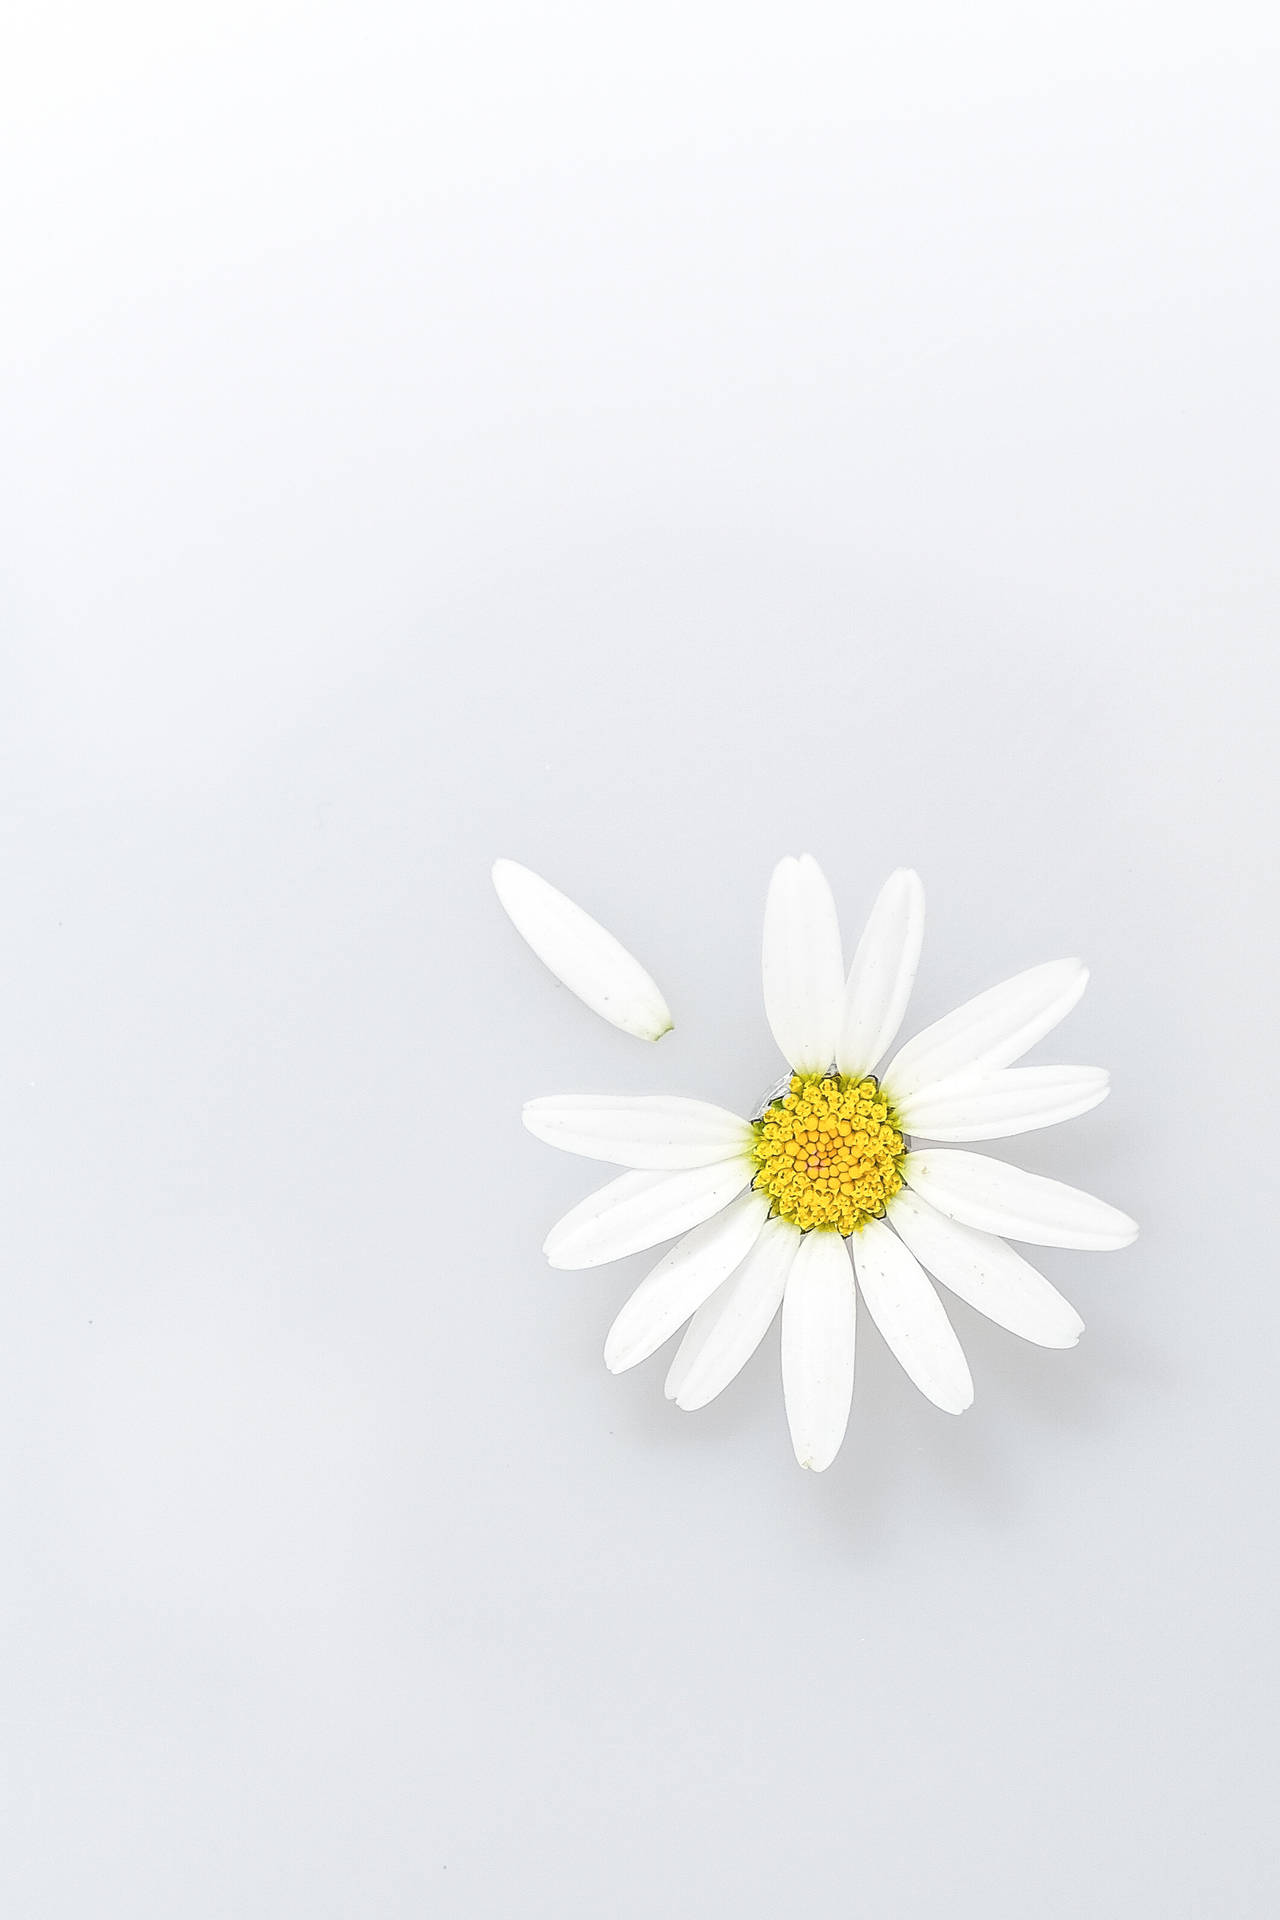 Daisy 3000X4499 Wallpaper and Background Image